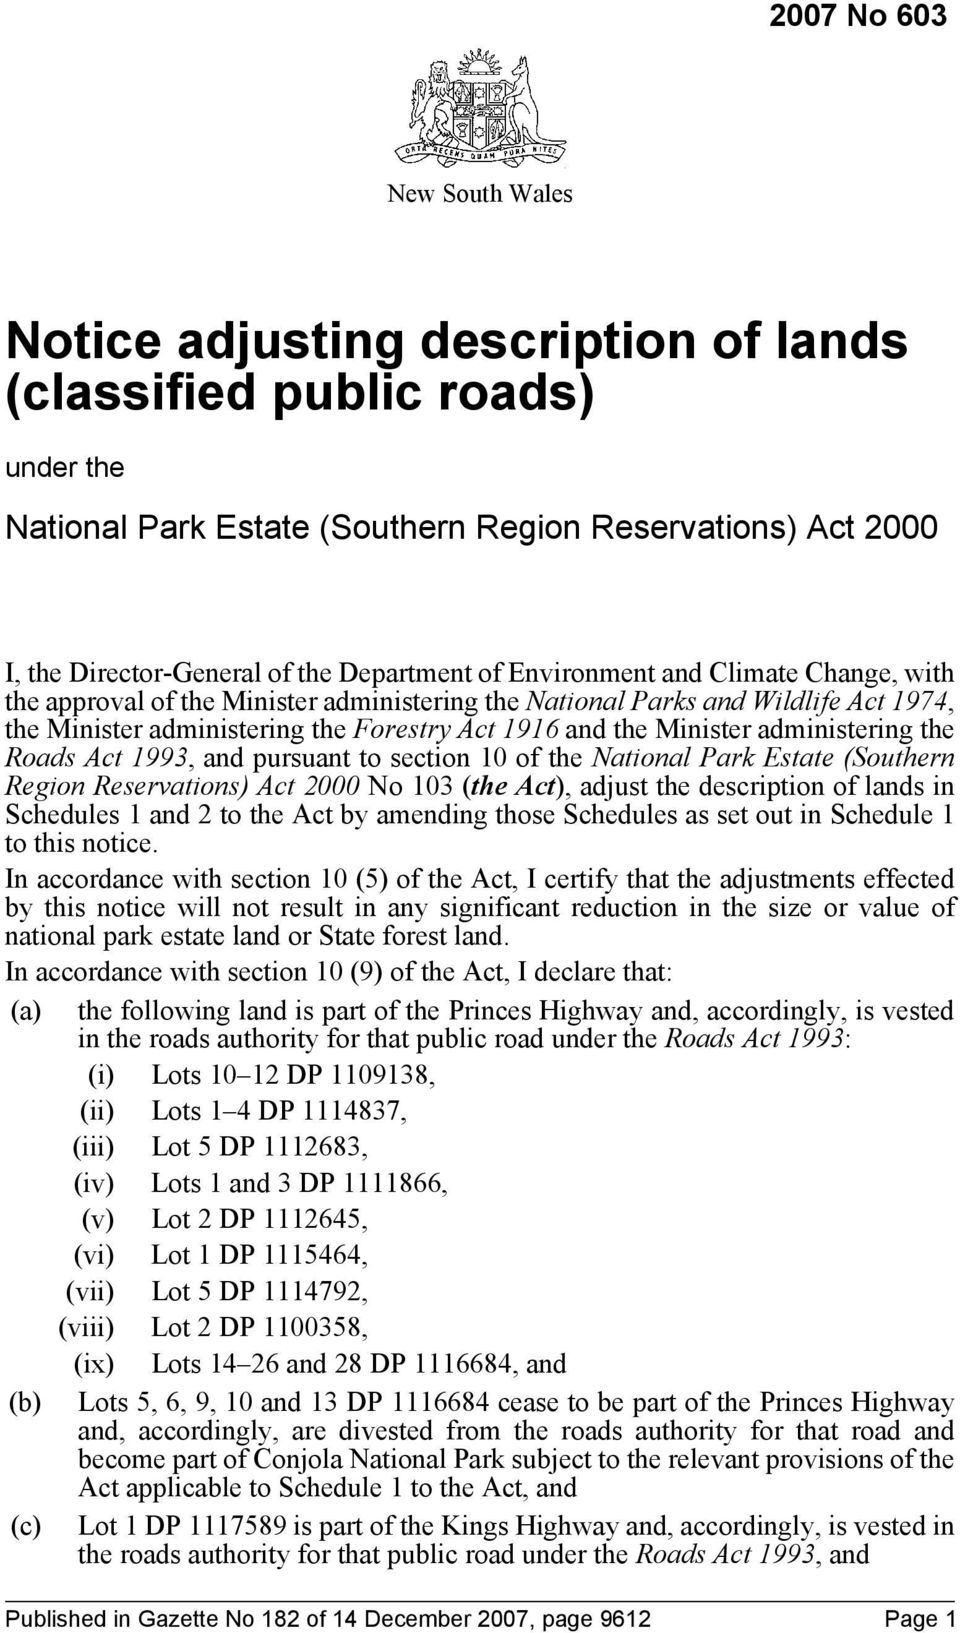 administering the Roads Act 1993, and pursuant to section 10 of the National Park Estate (Southern Region Reservations) Act 2000 No 103 (the Act), adjust the description of lands in Schedules 1 and 2